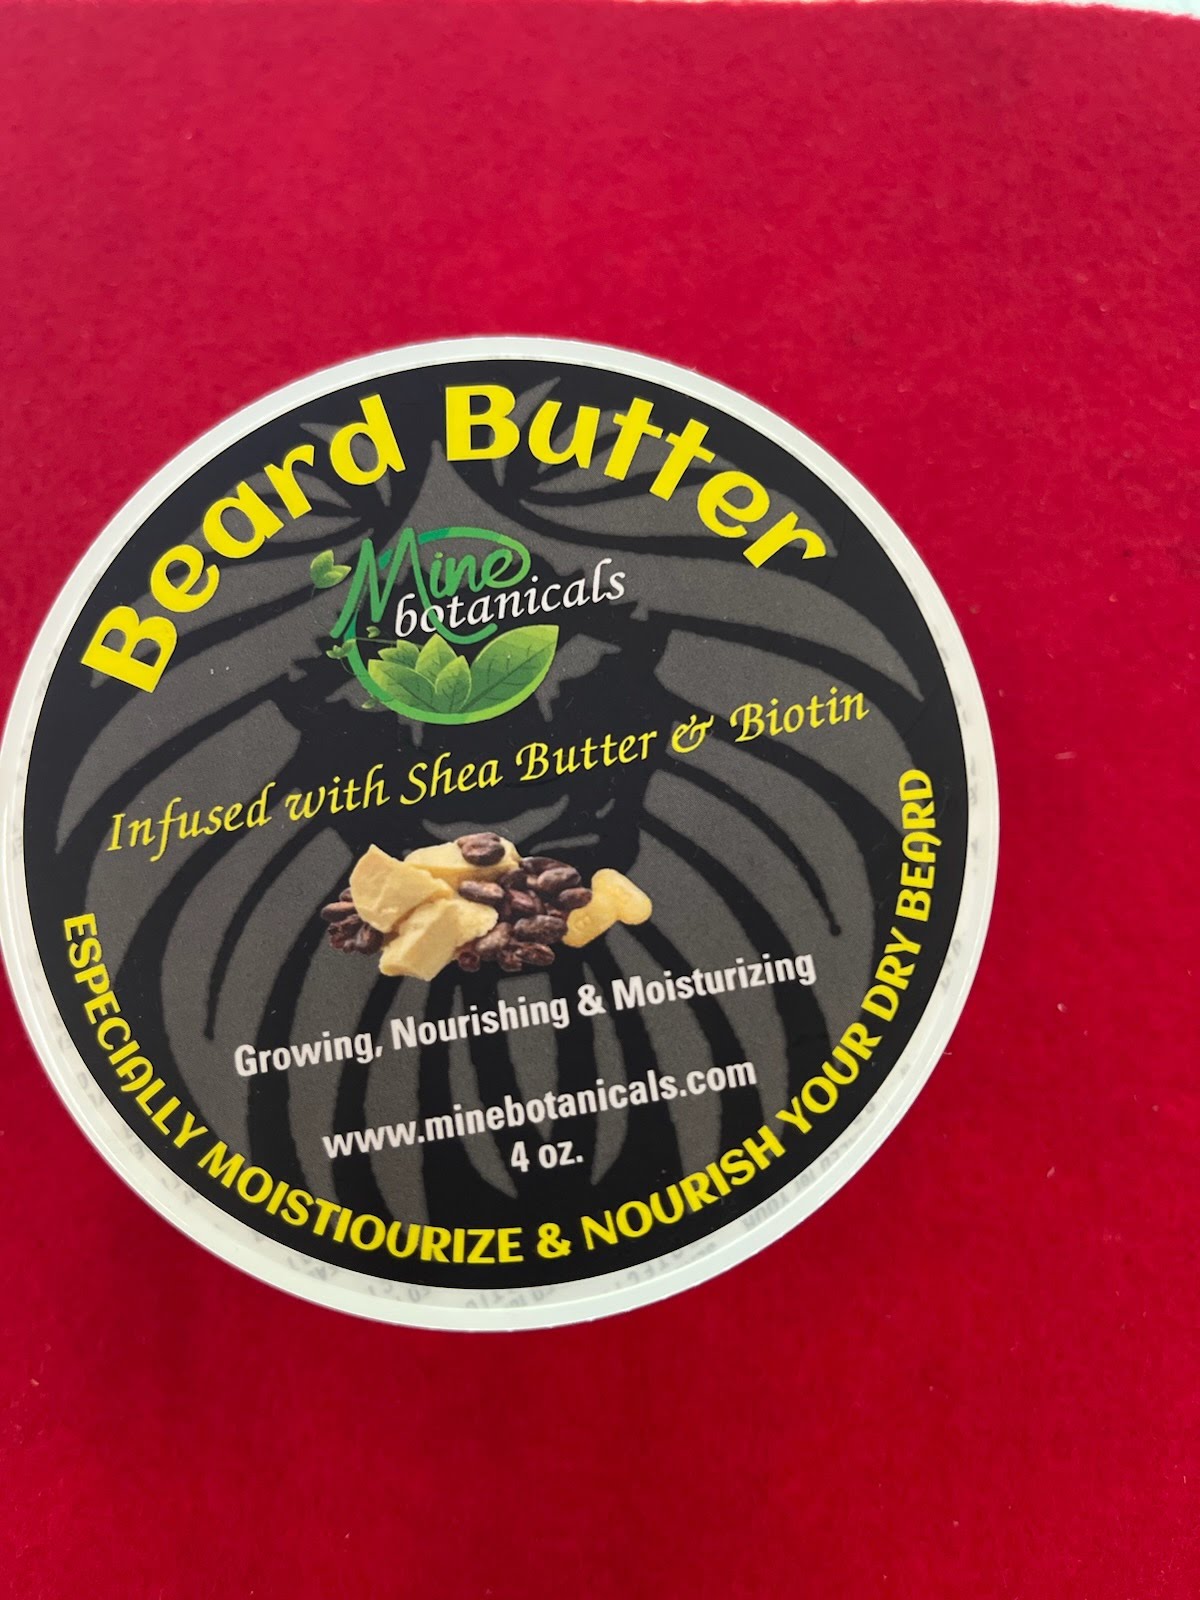 A red table with a label for a beard butter.